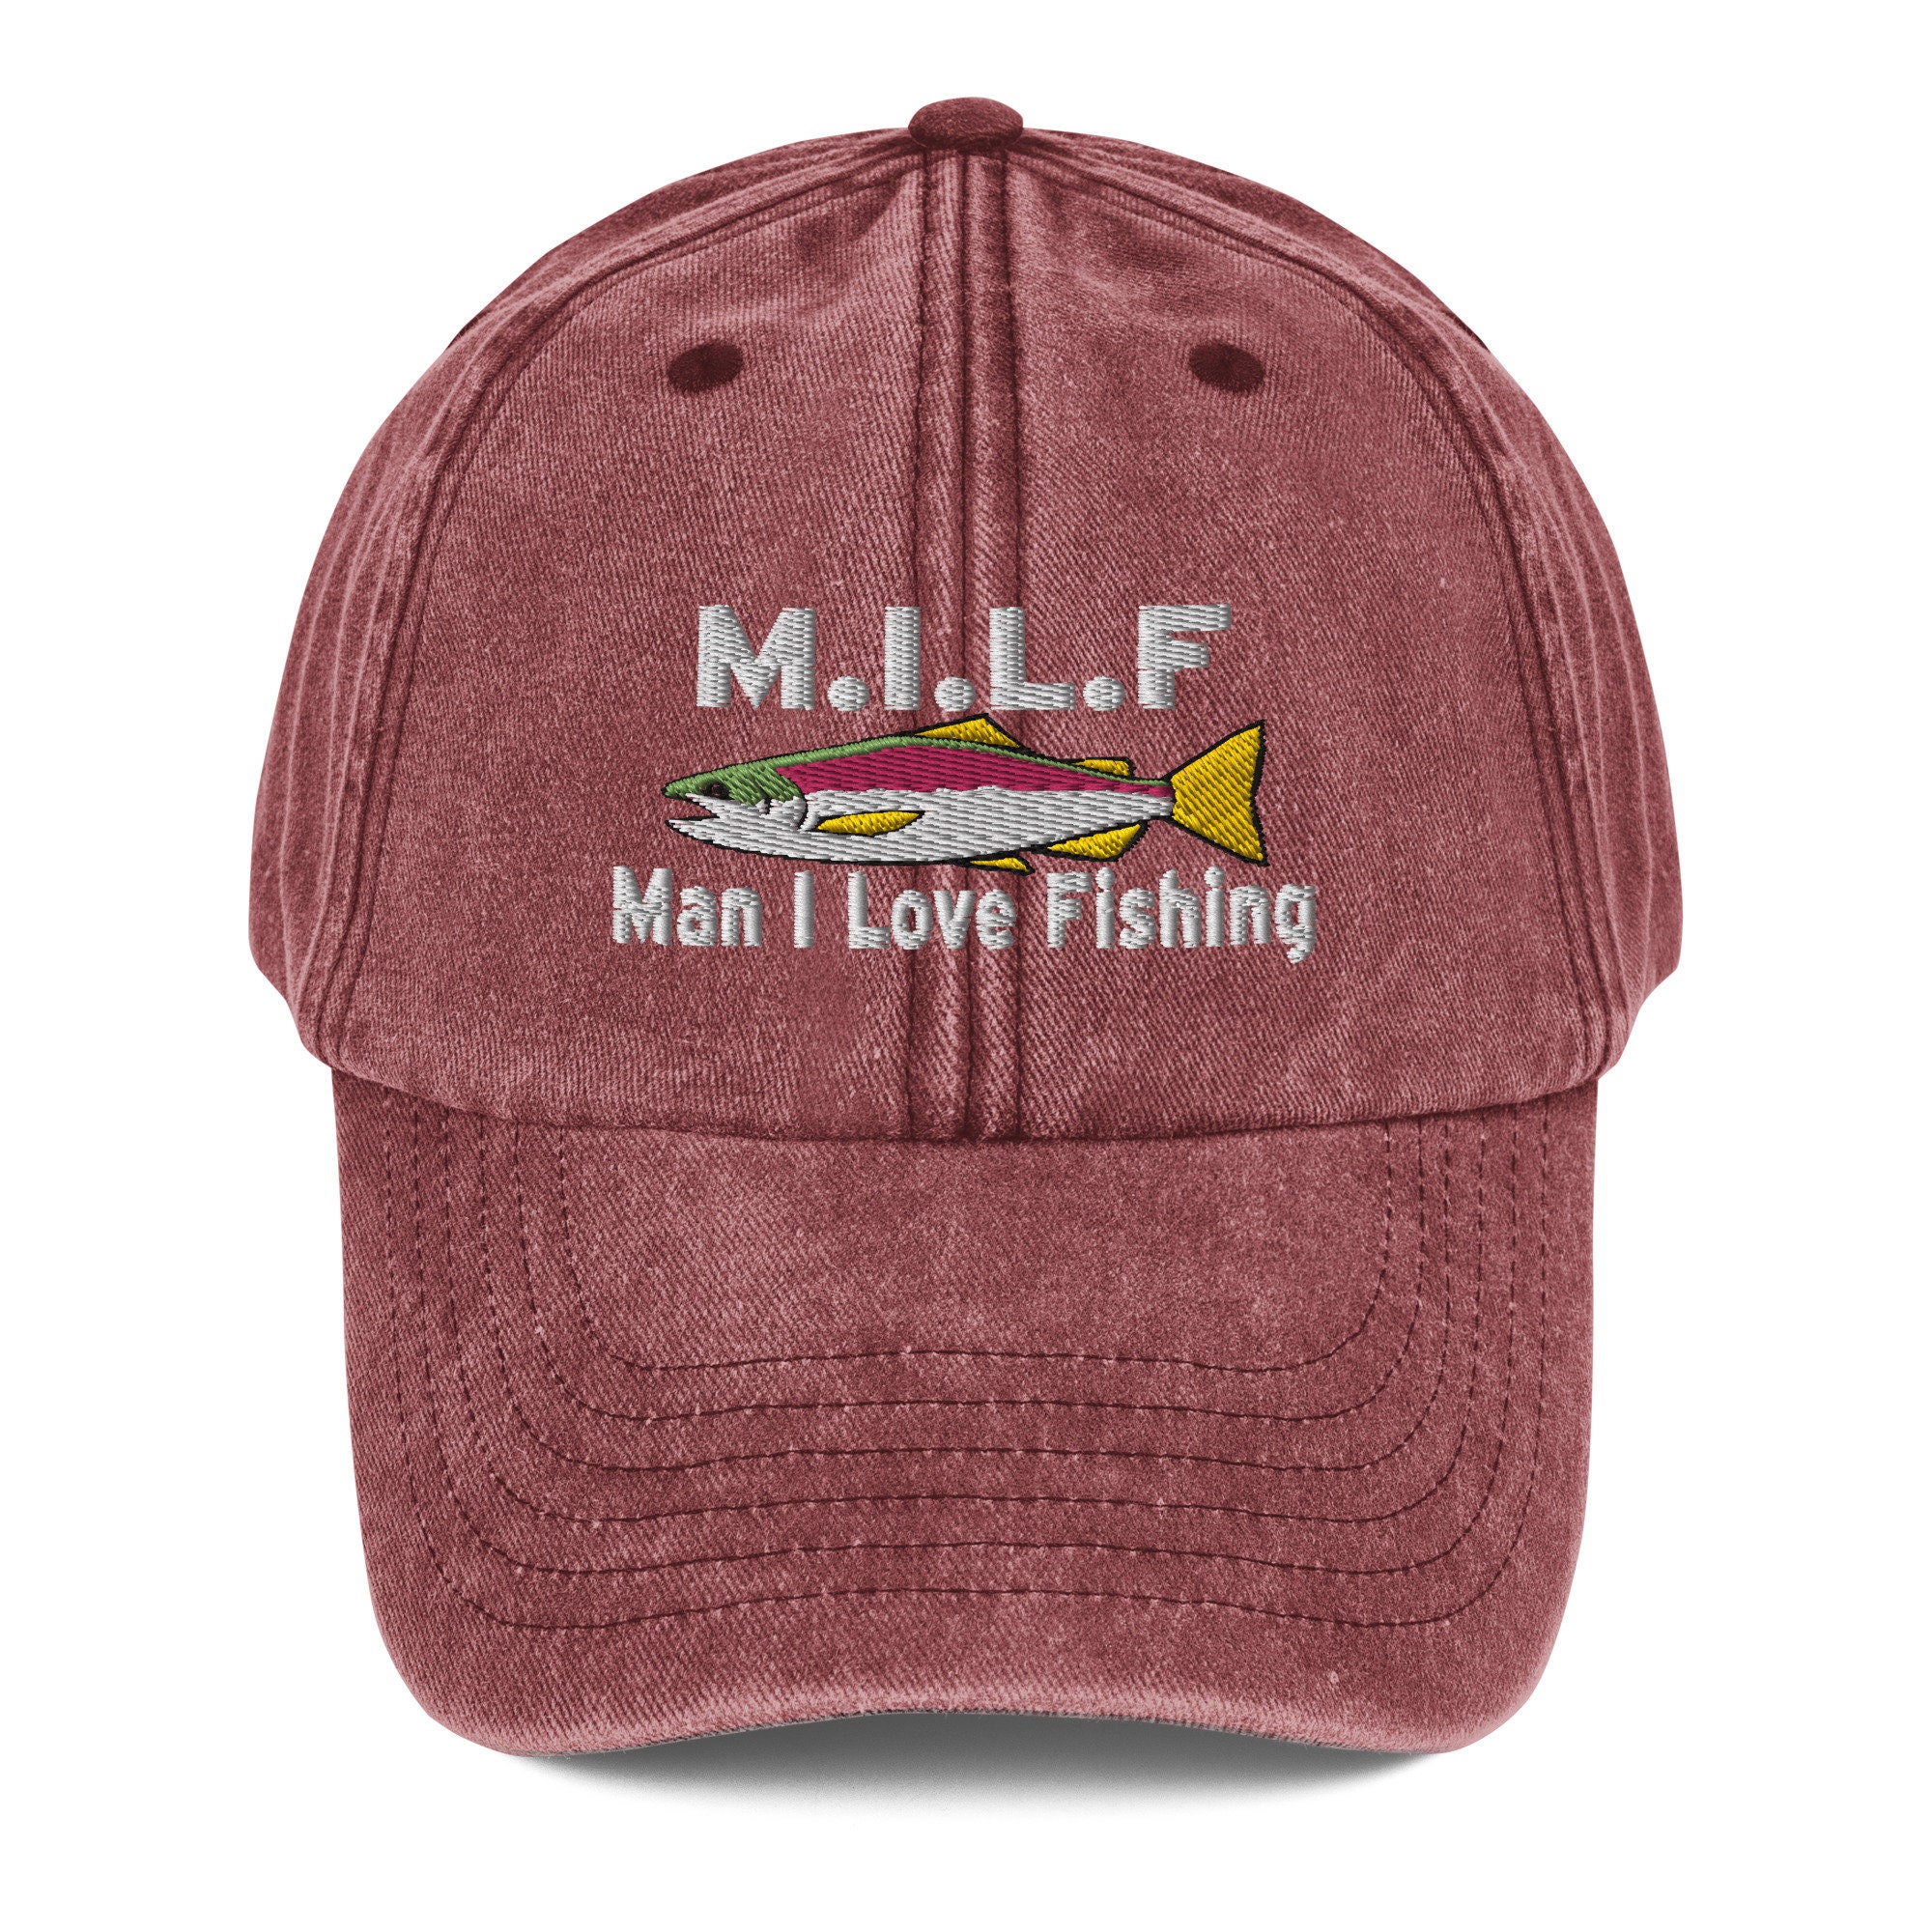 MILF, Man I Love Fishing Hat embroidered Vintage Hat, Funny Fishing Gift 